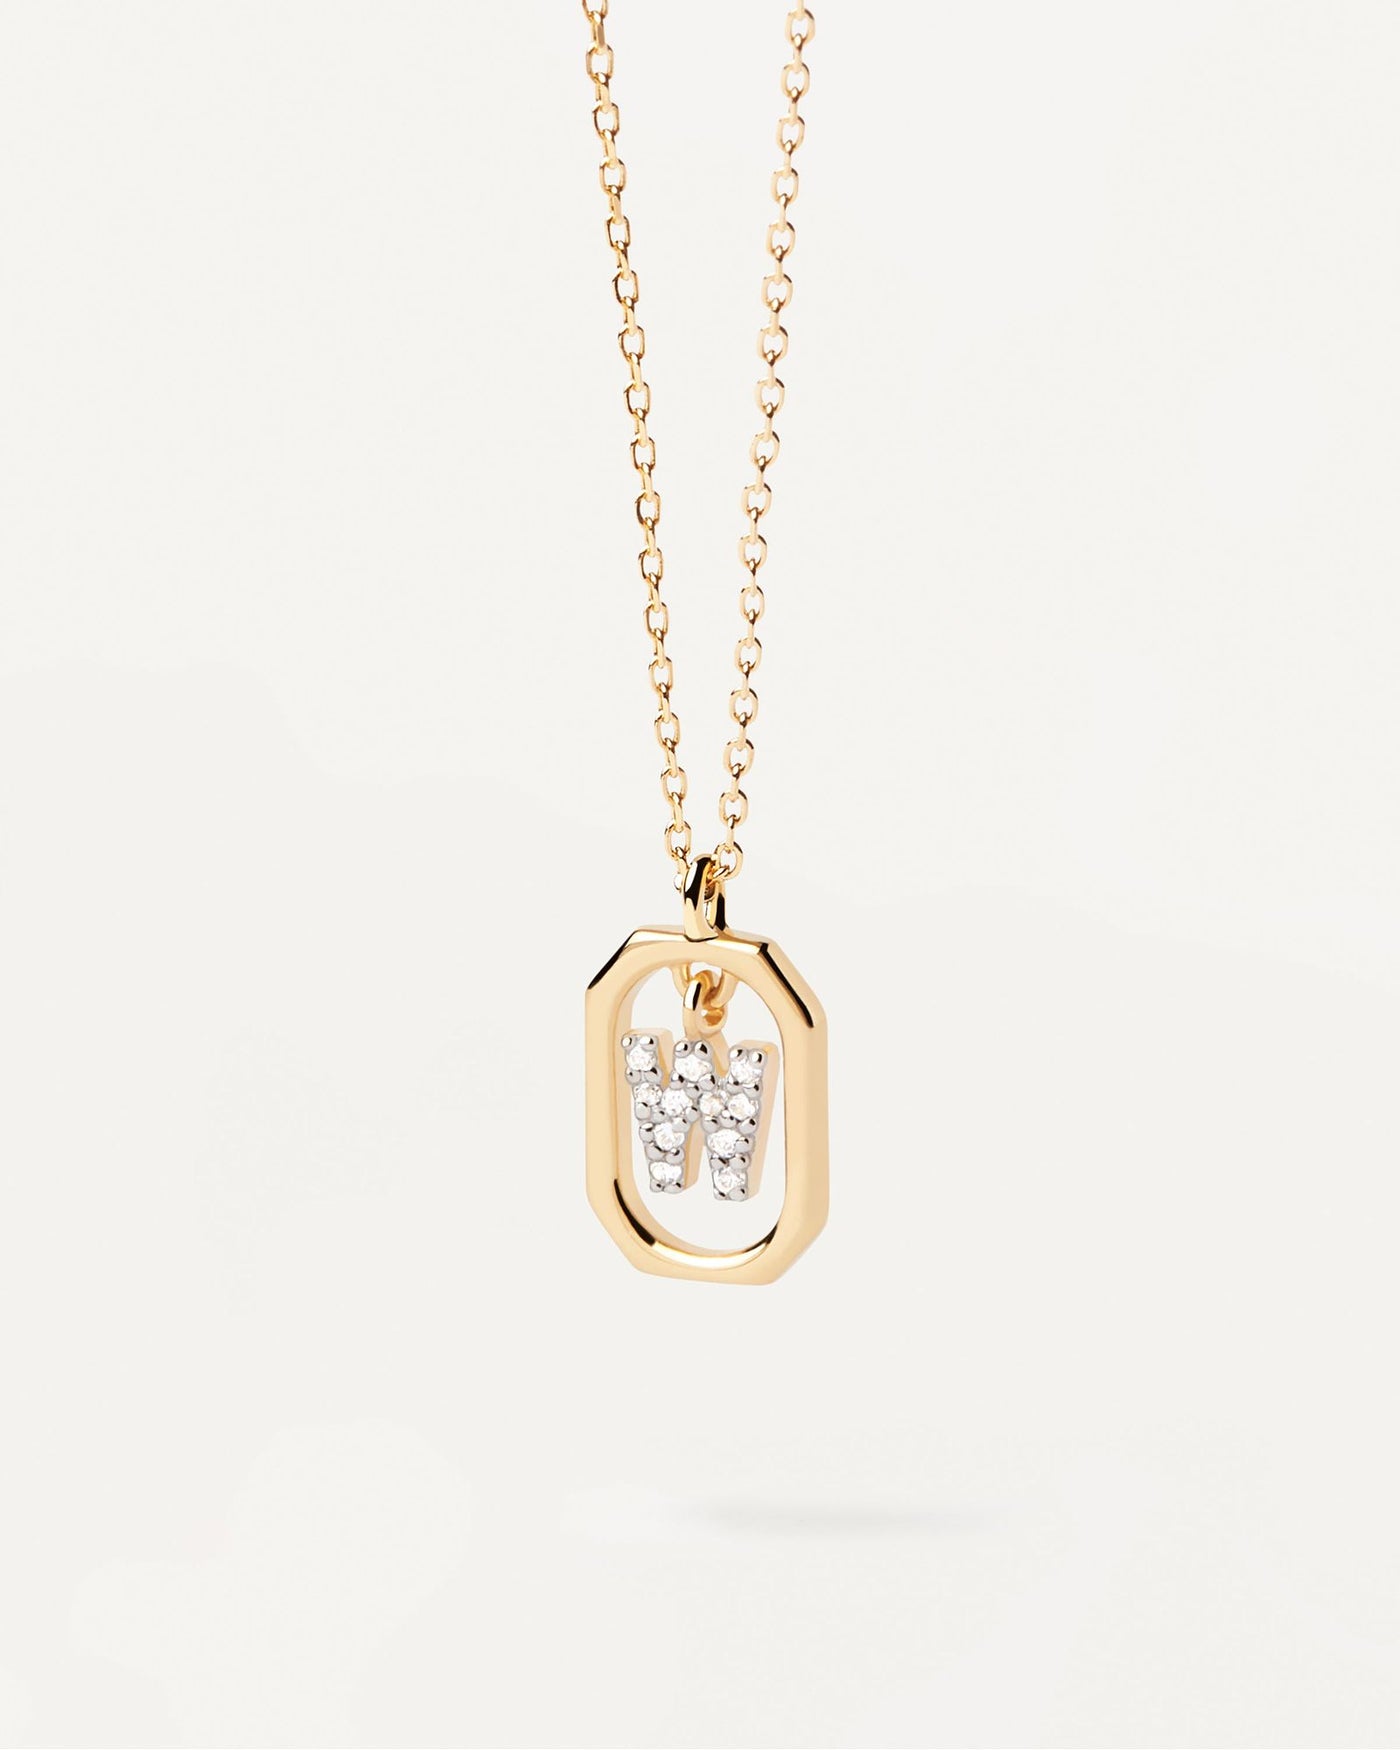 2024 Selection | Mini Letter W Necklace. Small initial W necklace in zirconia inside gold-plated silver octagonal pendant. Get the latest arrival from PDPAOLA. Place your order safely and get this Best Seller. Free Shipping.